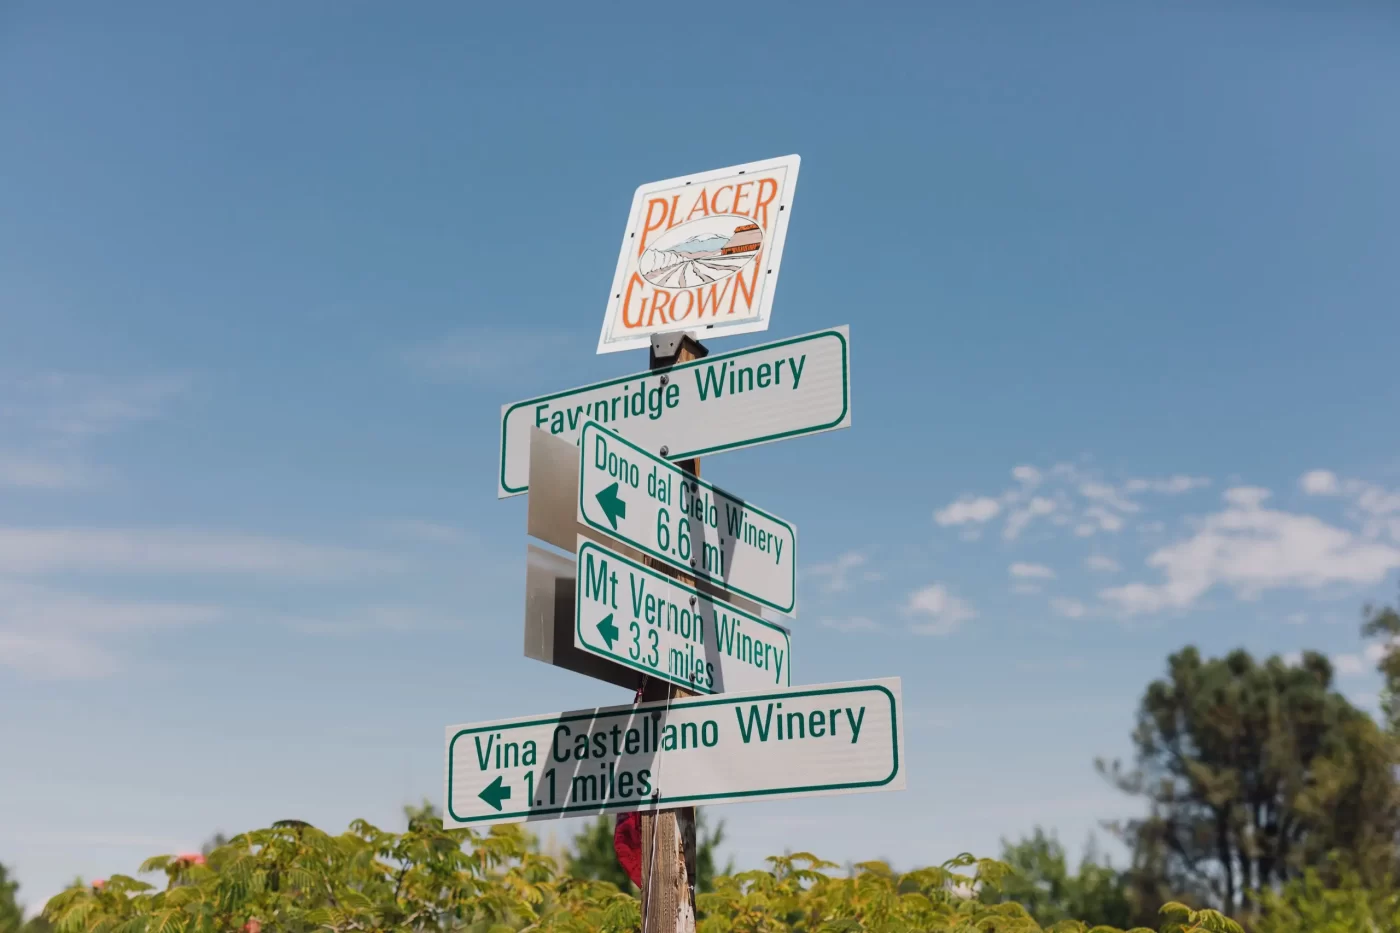 Your Guide to Exploring the Placer Wine & Ale Trail